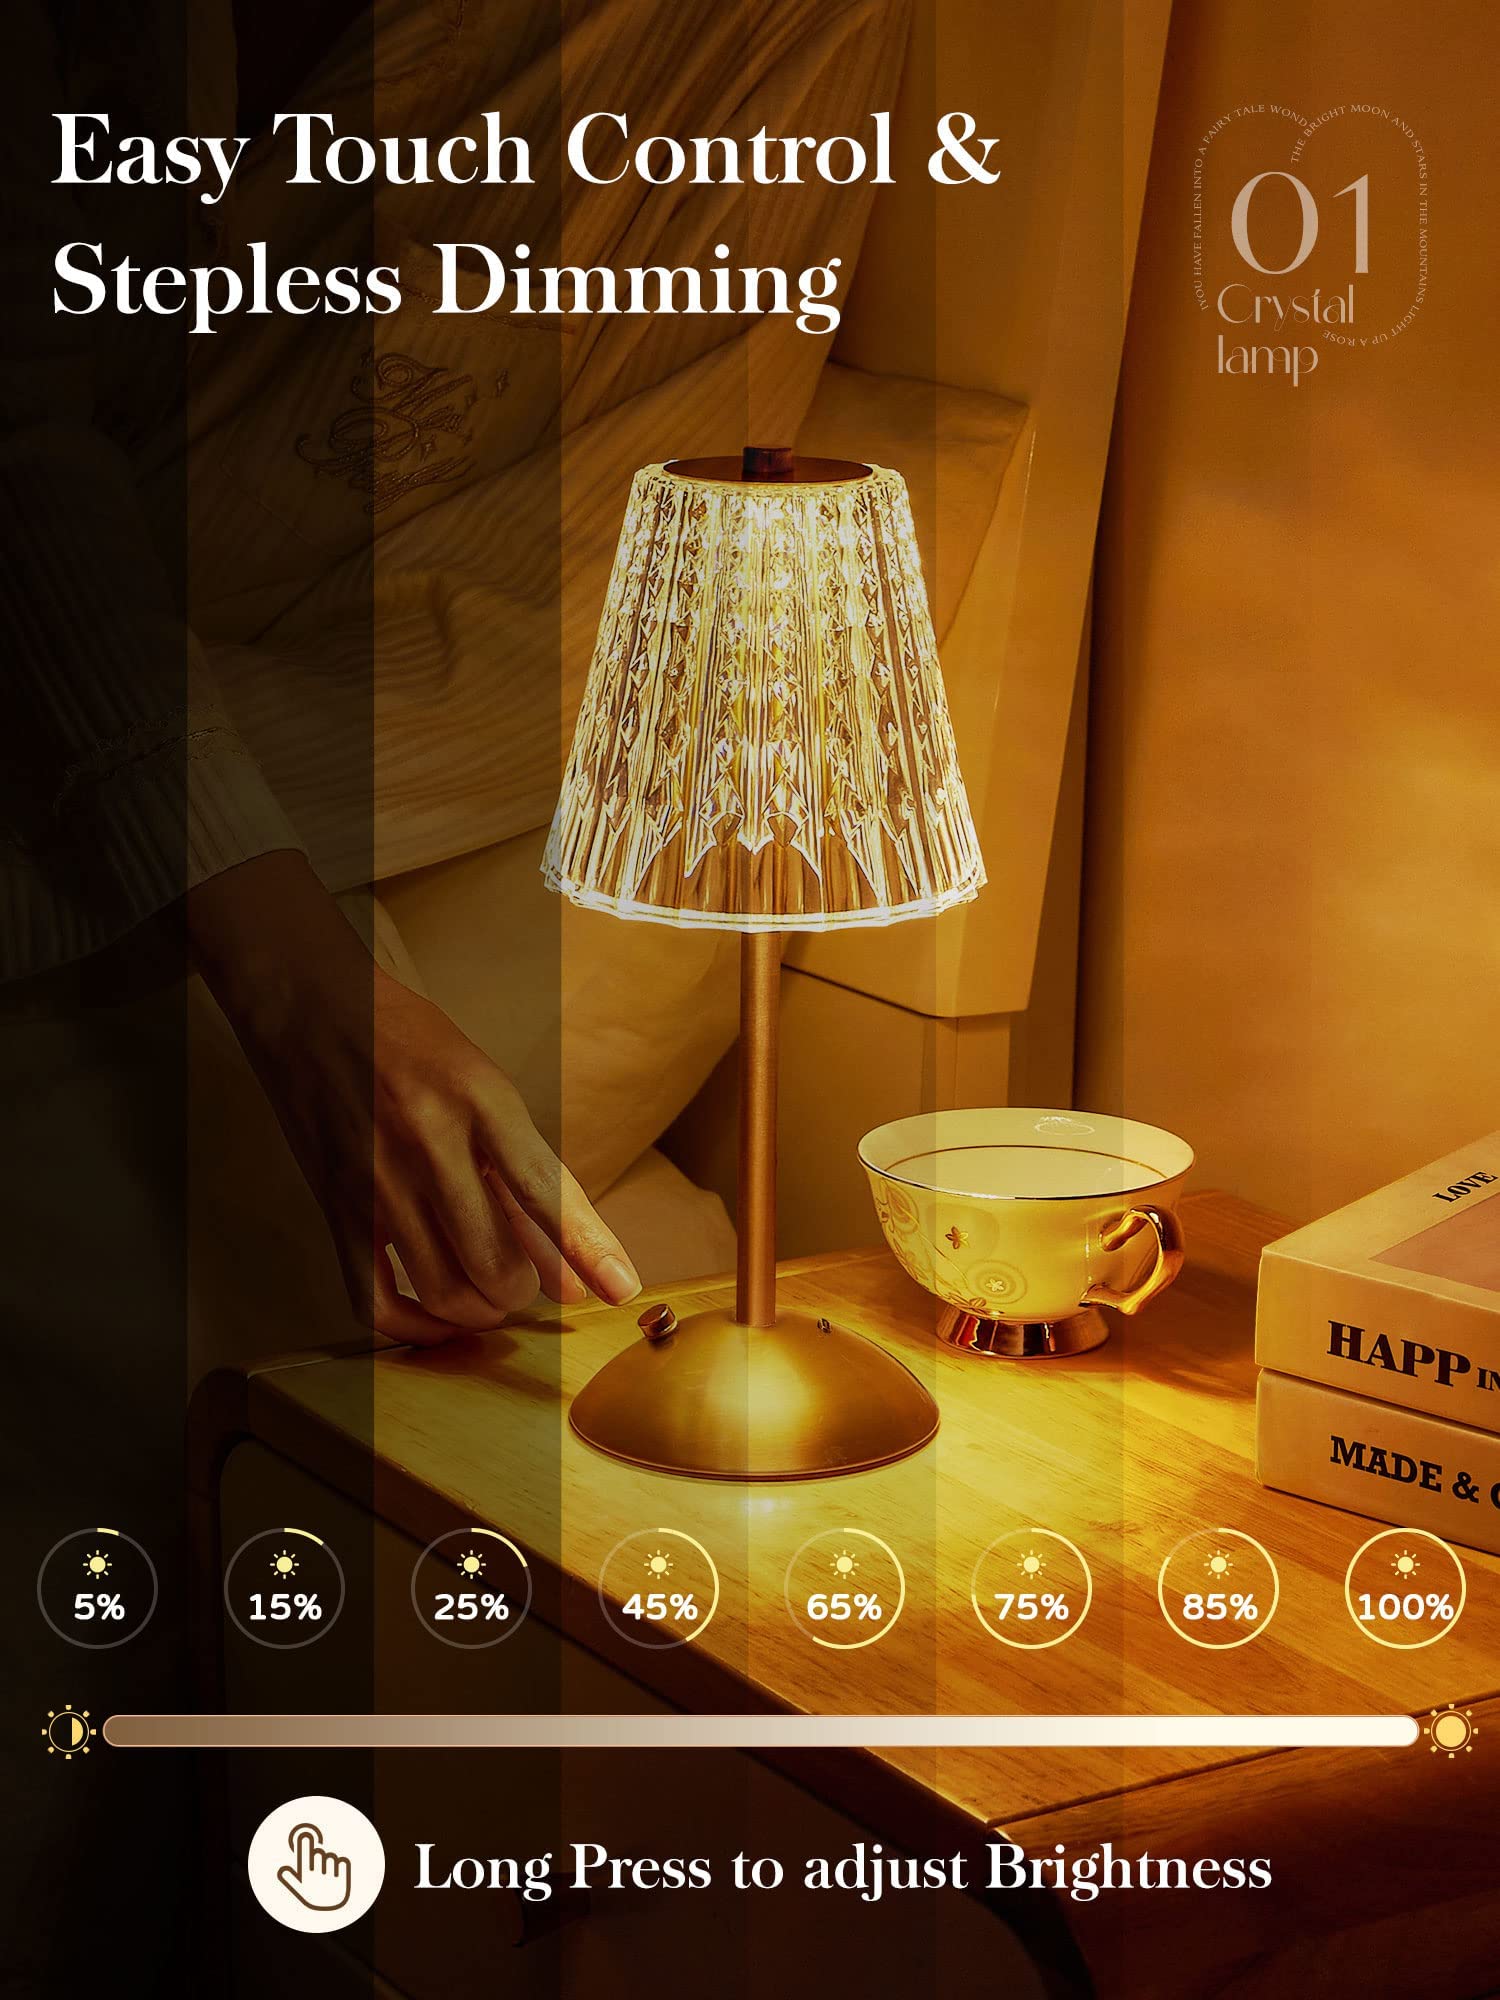 VIO Table Lamps, Dimmable Crystal Table Lamp, 3 Colors LED Rose Lamp Diamond Crystal Lamp, Rechargeable Touch Lamp Small Lamp, Bedside Lamp Nightstand Lamp for Bedroom Living Room Dinner Bar